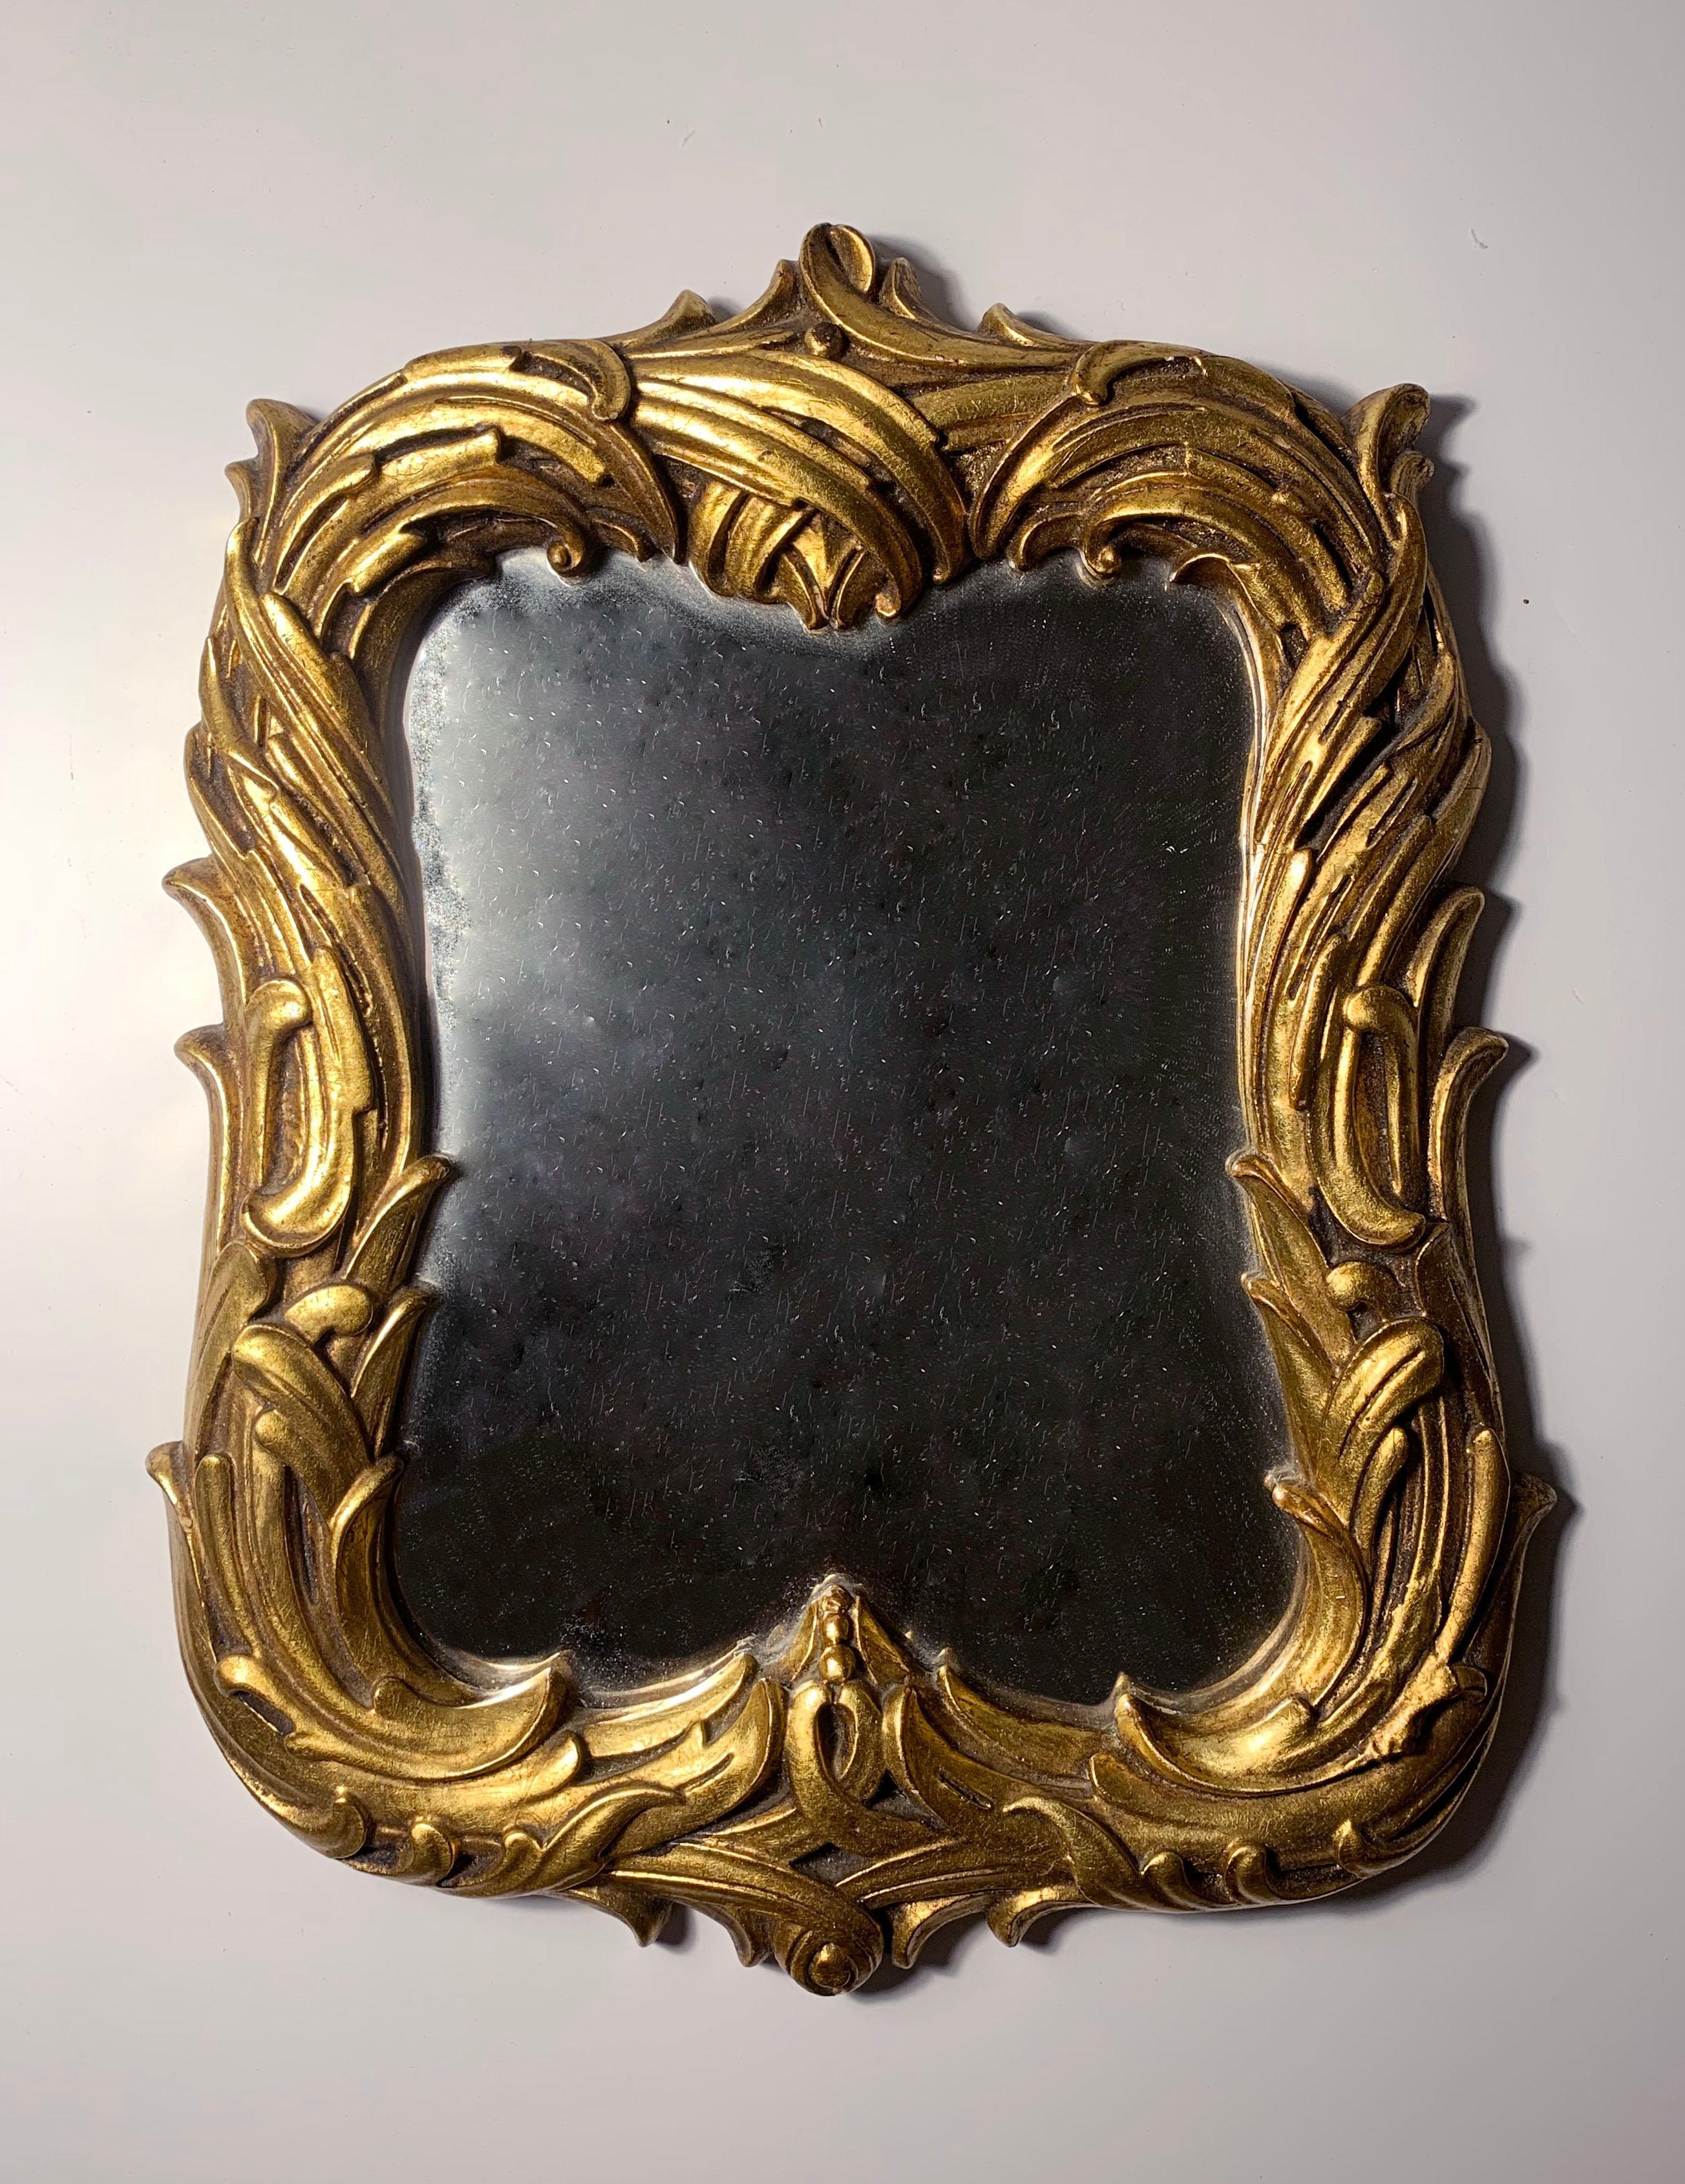 New art wares vintage mirror. Style of Serge Roche and Dorothy Draper